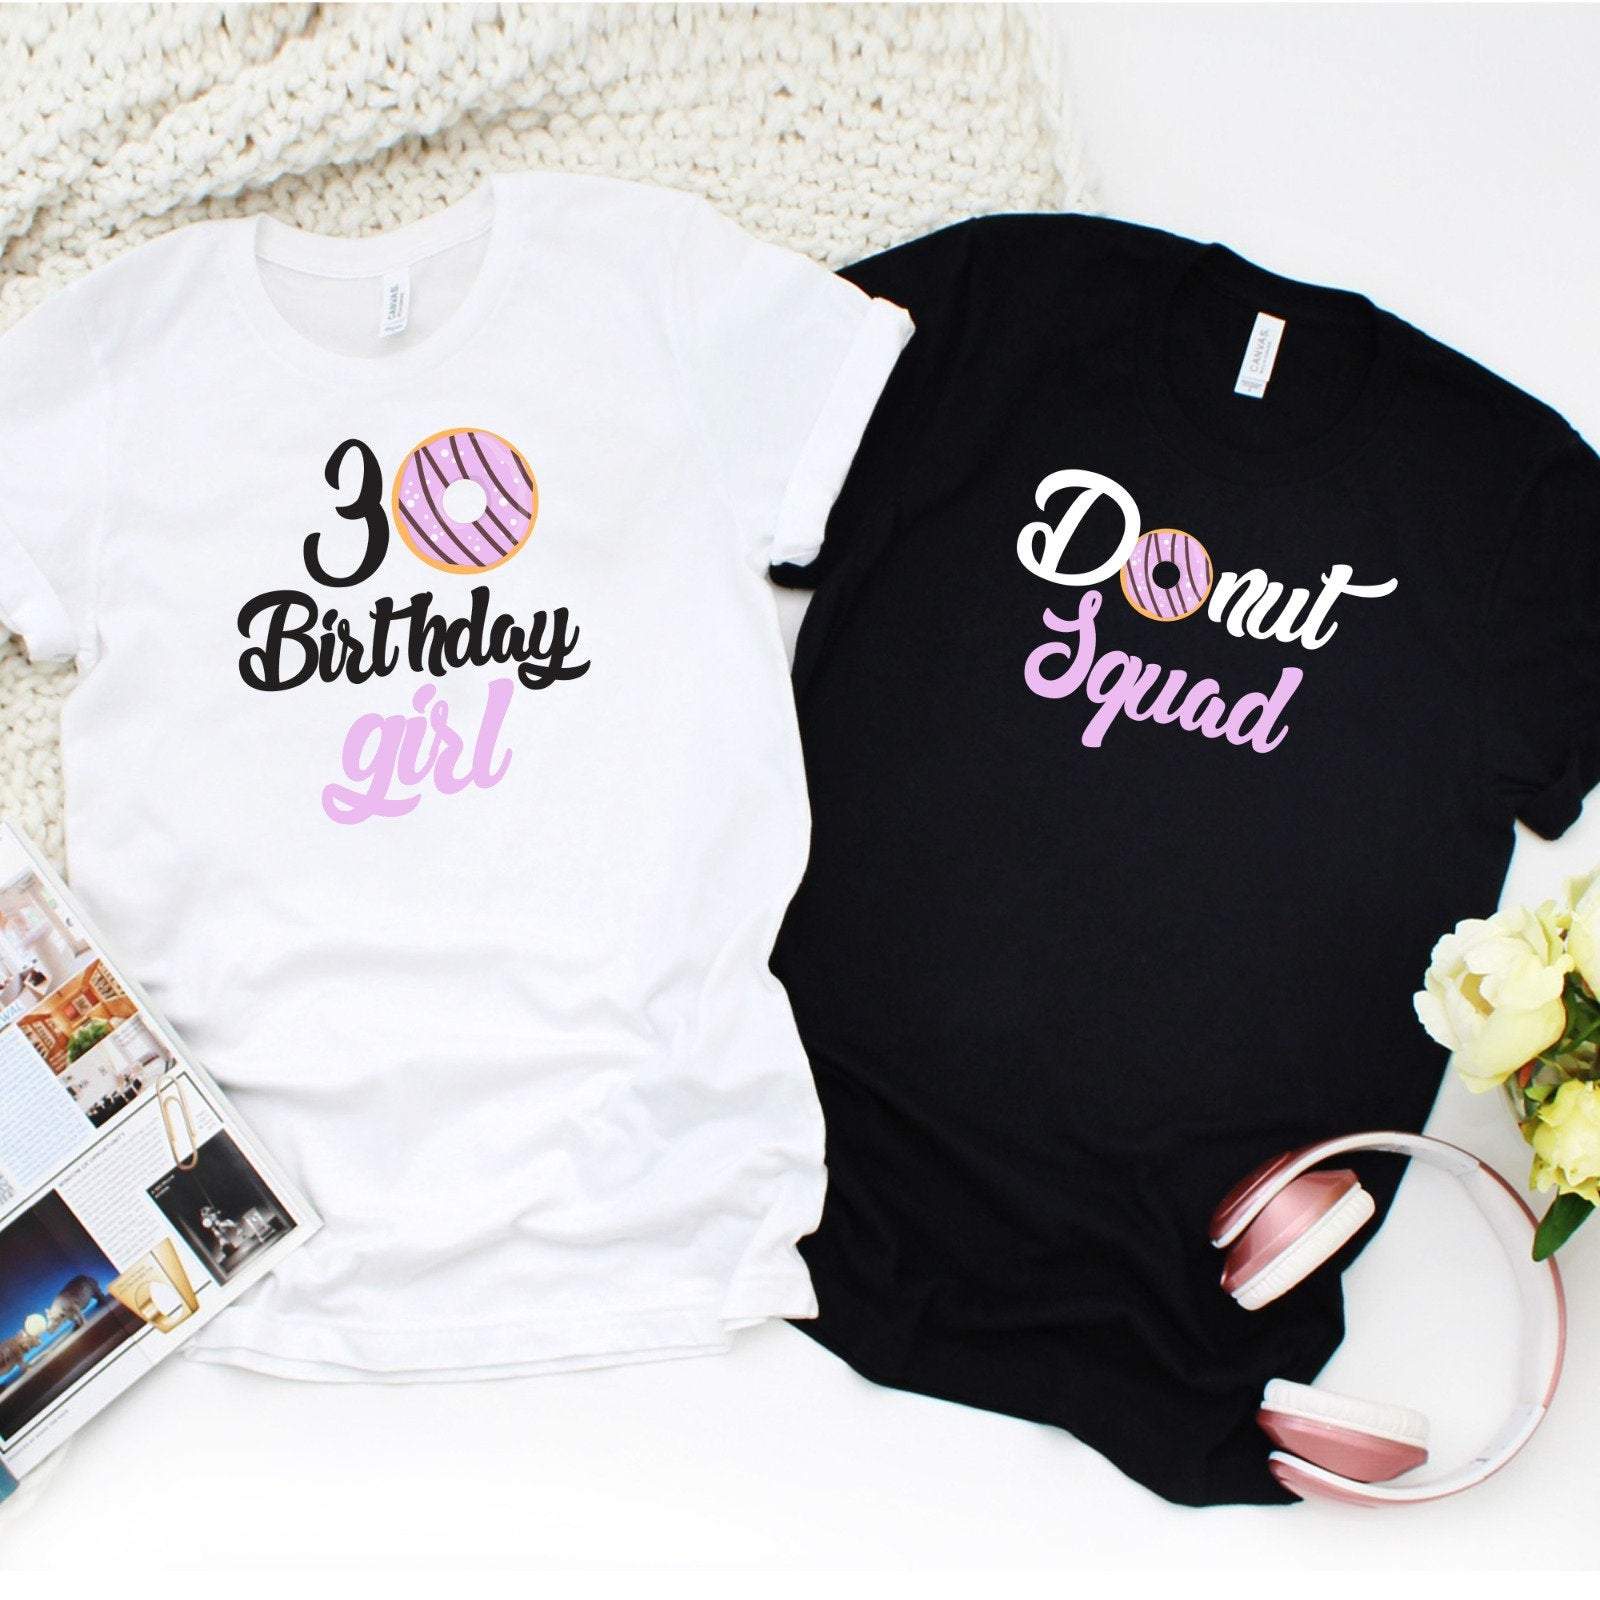 Donut themed birthday girl and donut squad t-shirt, UNISEX sizes, Suitable for all ages